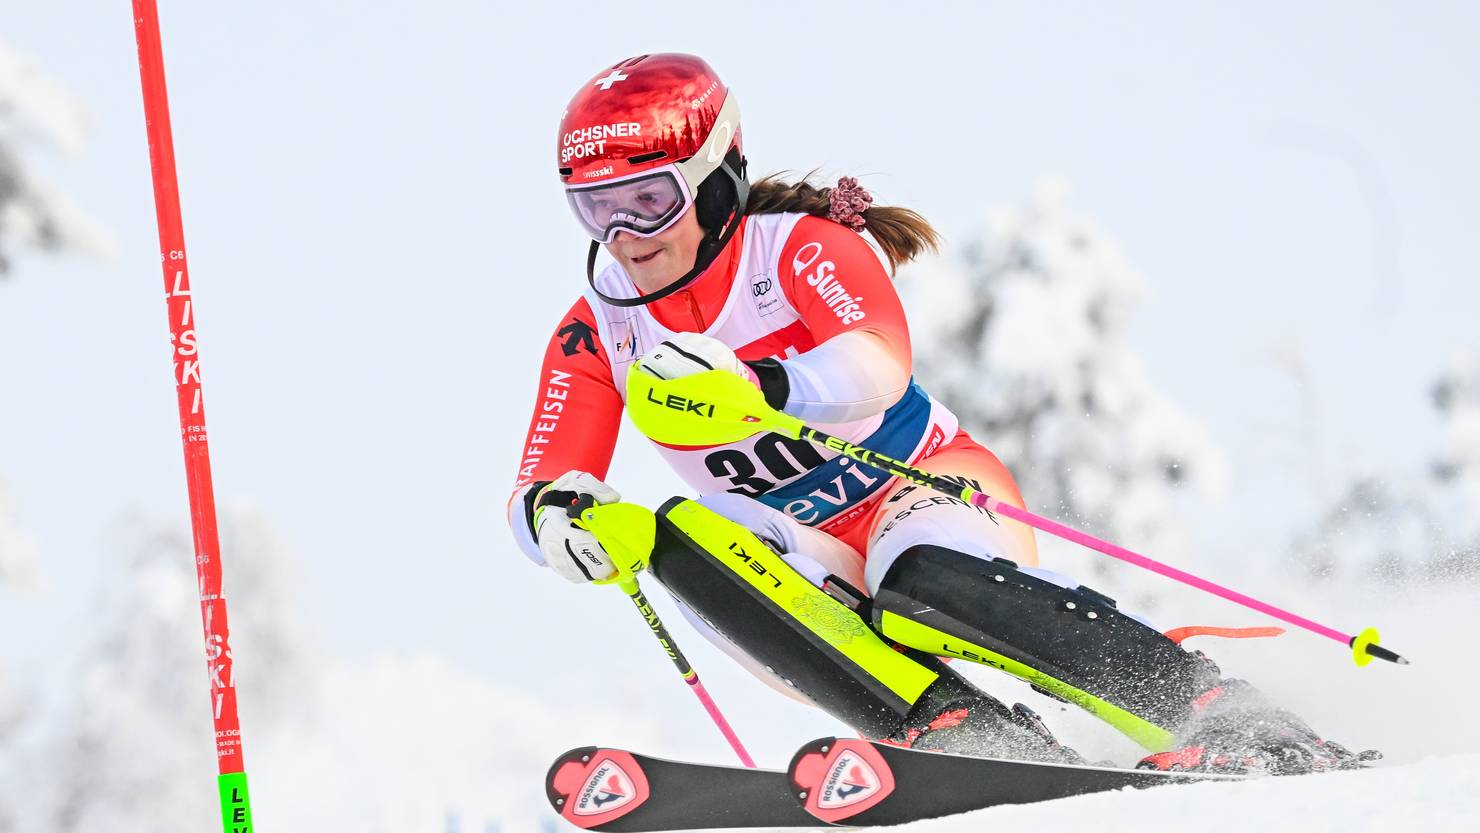 Vlhova Victorious in Levi Slalom as Meillard Makes Strides and Holdener Disappoints